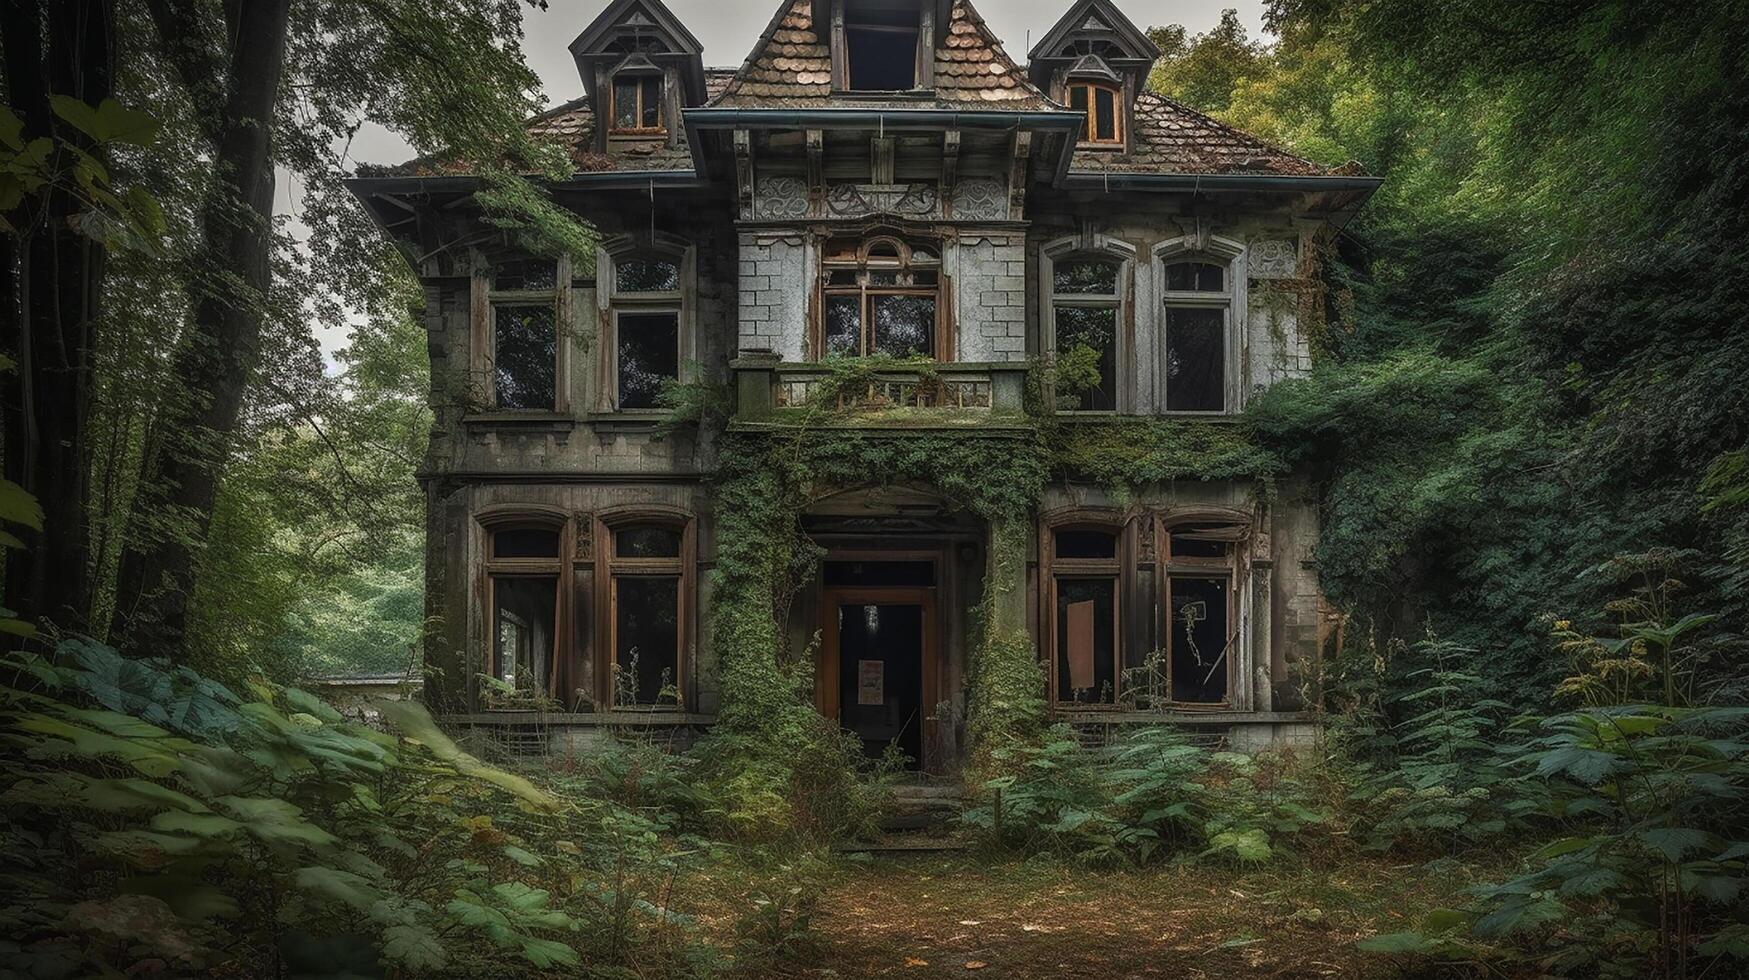 View of deserted and decaying house in nature photo